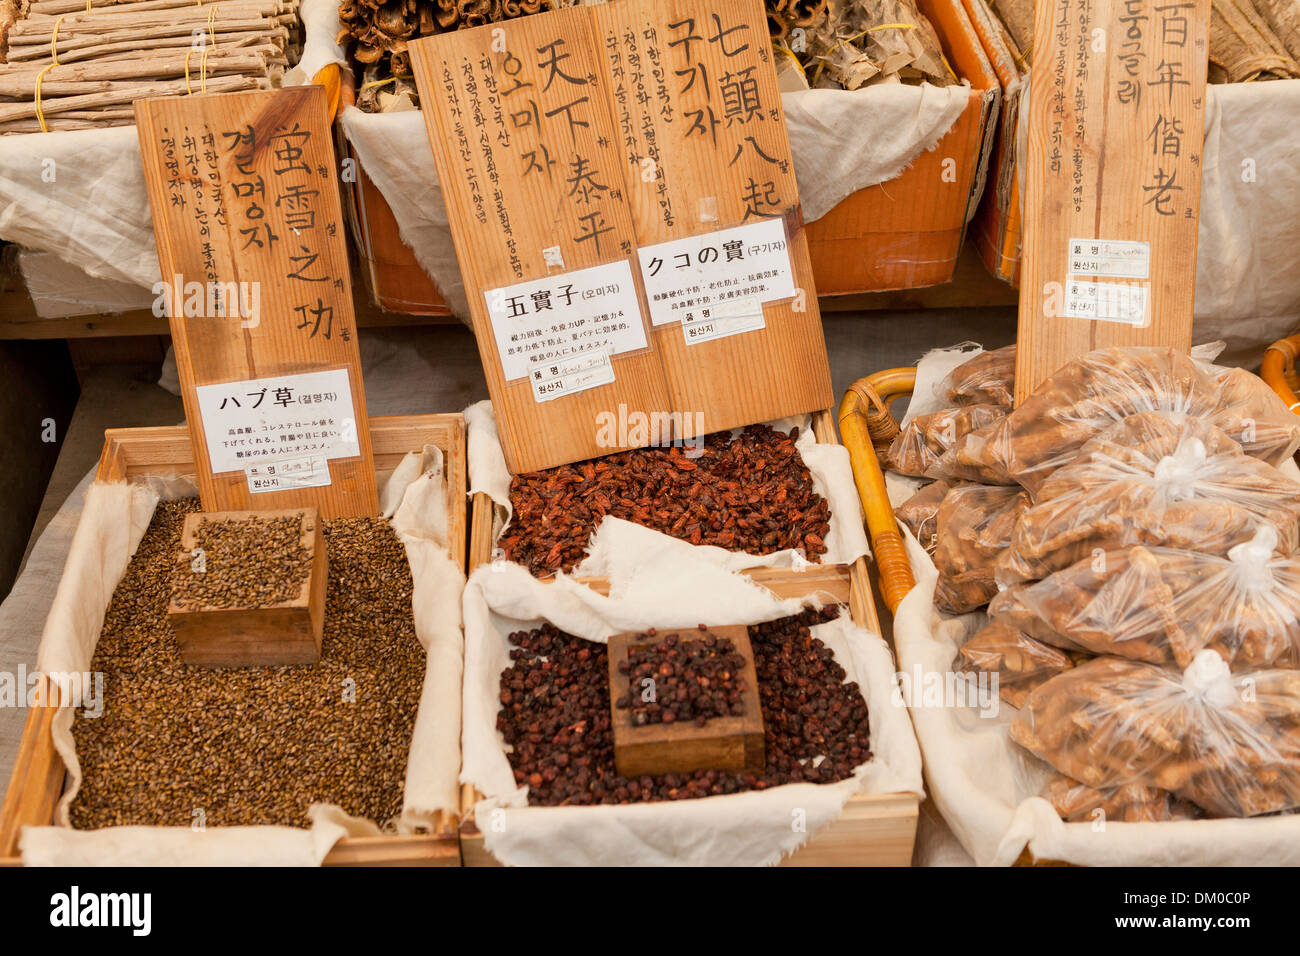 Medicinal herbs and plants for sale at traditional market - Seoul, South Korea Stock Photo